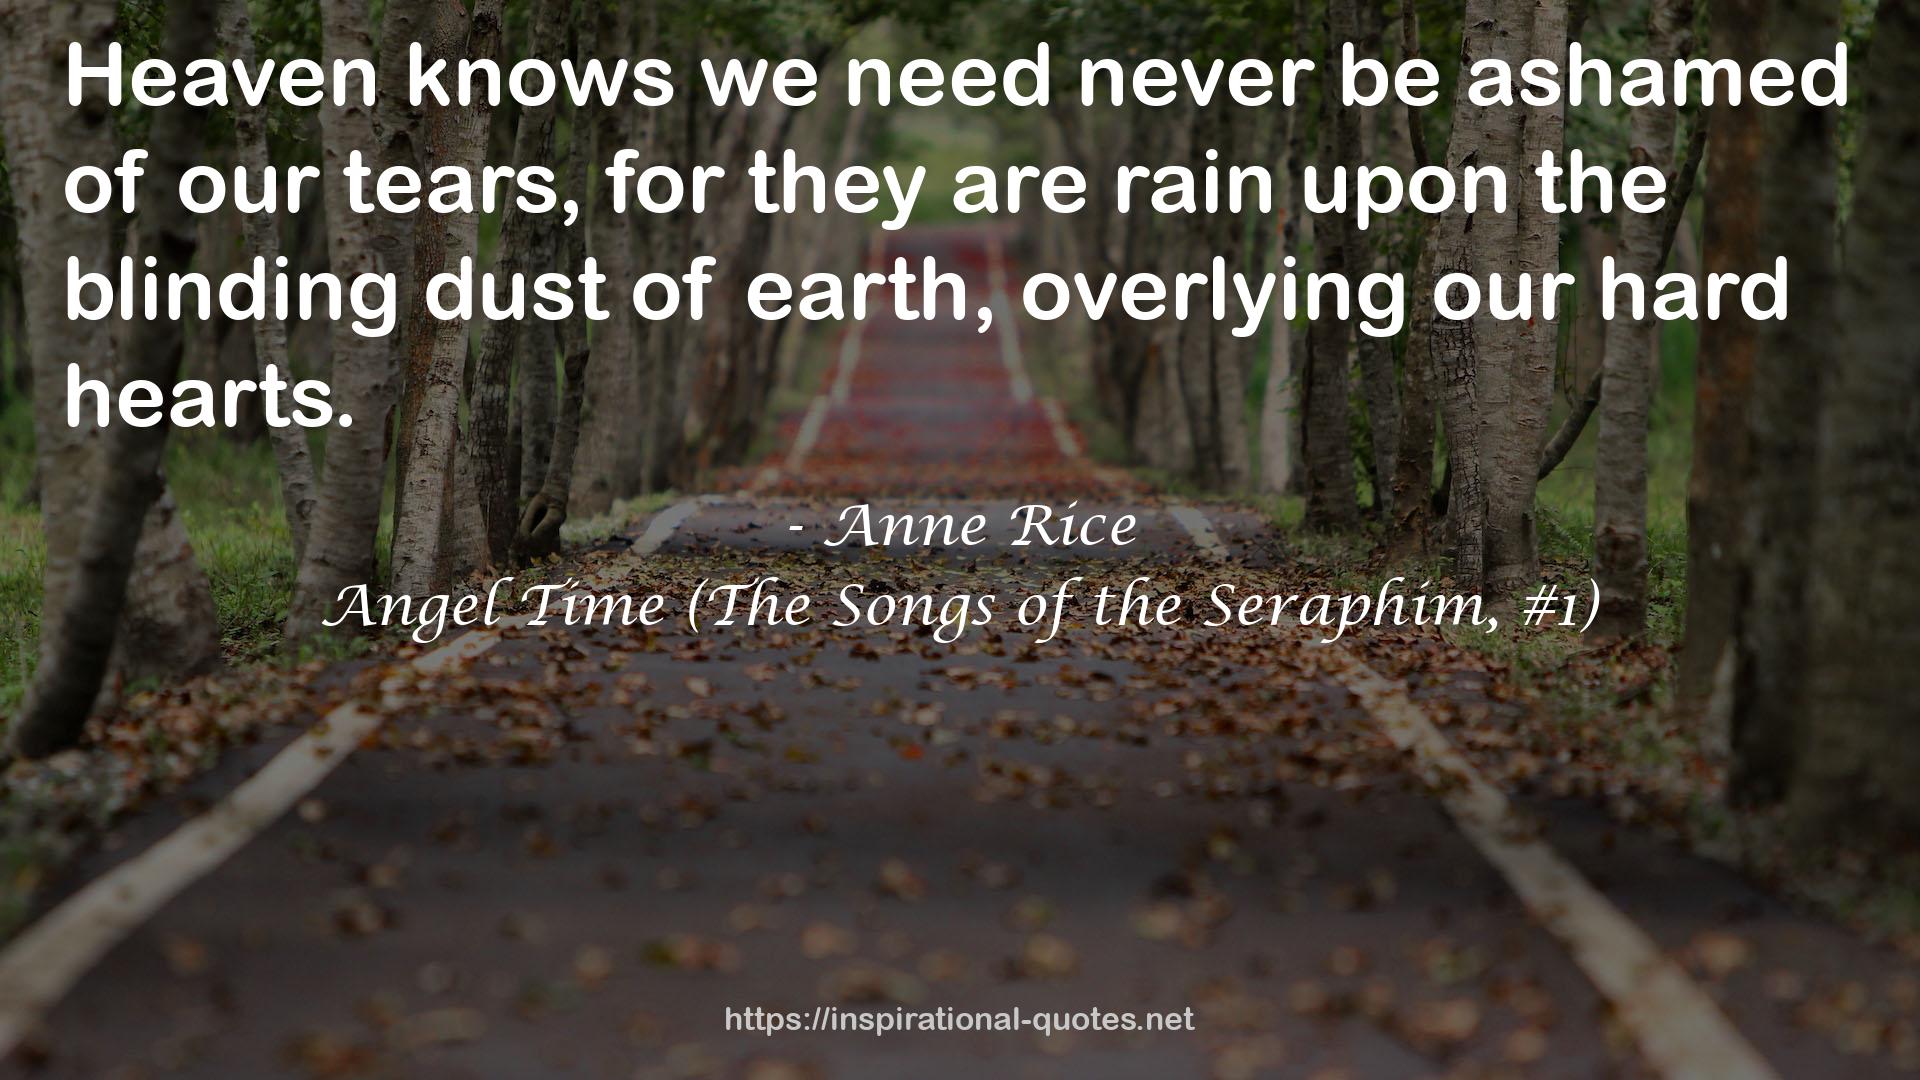 Angel Time (The Songs of the Seraphim, #1) QUOTES